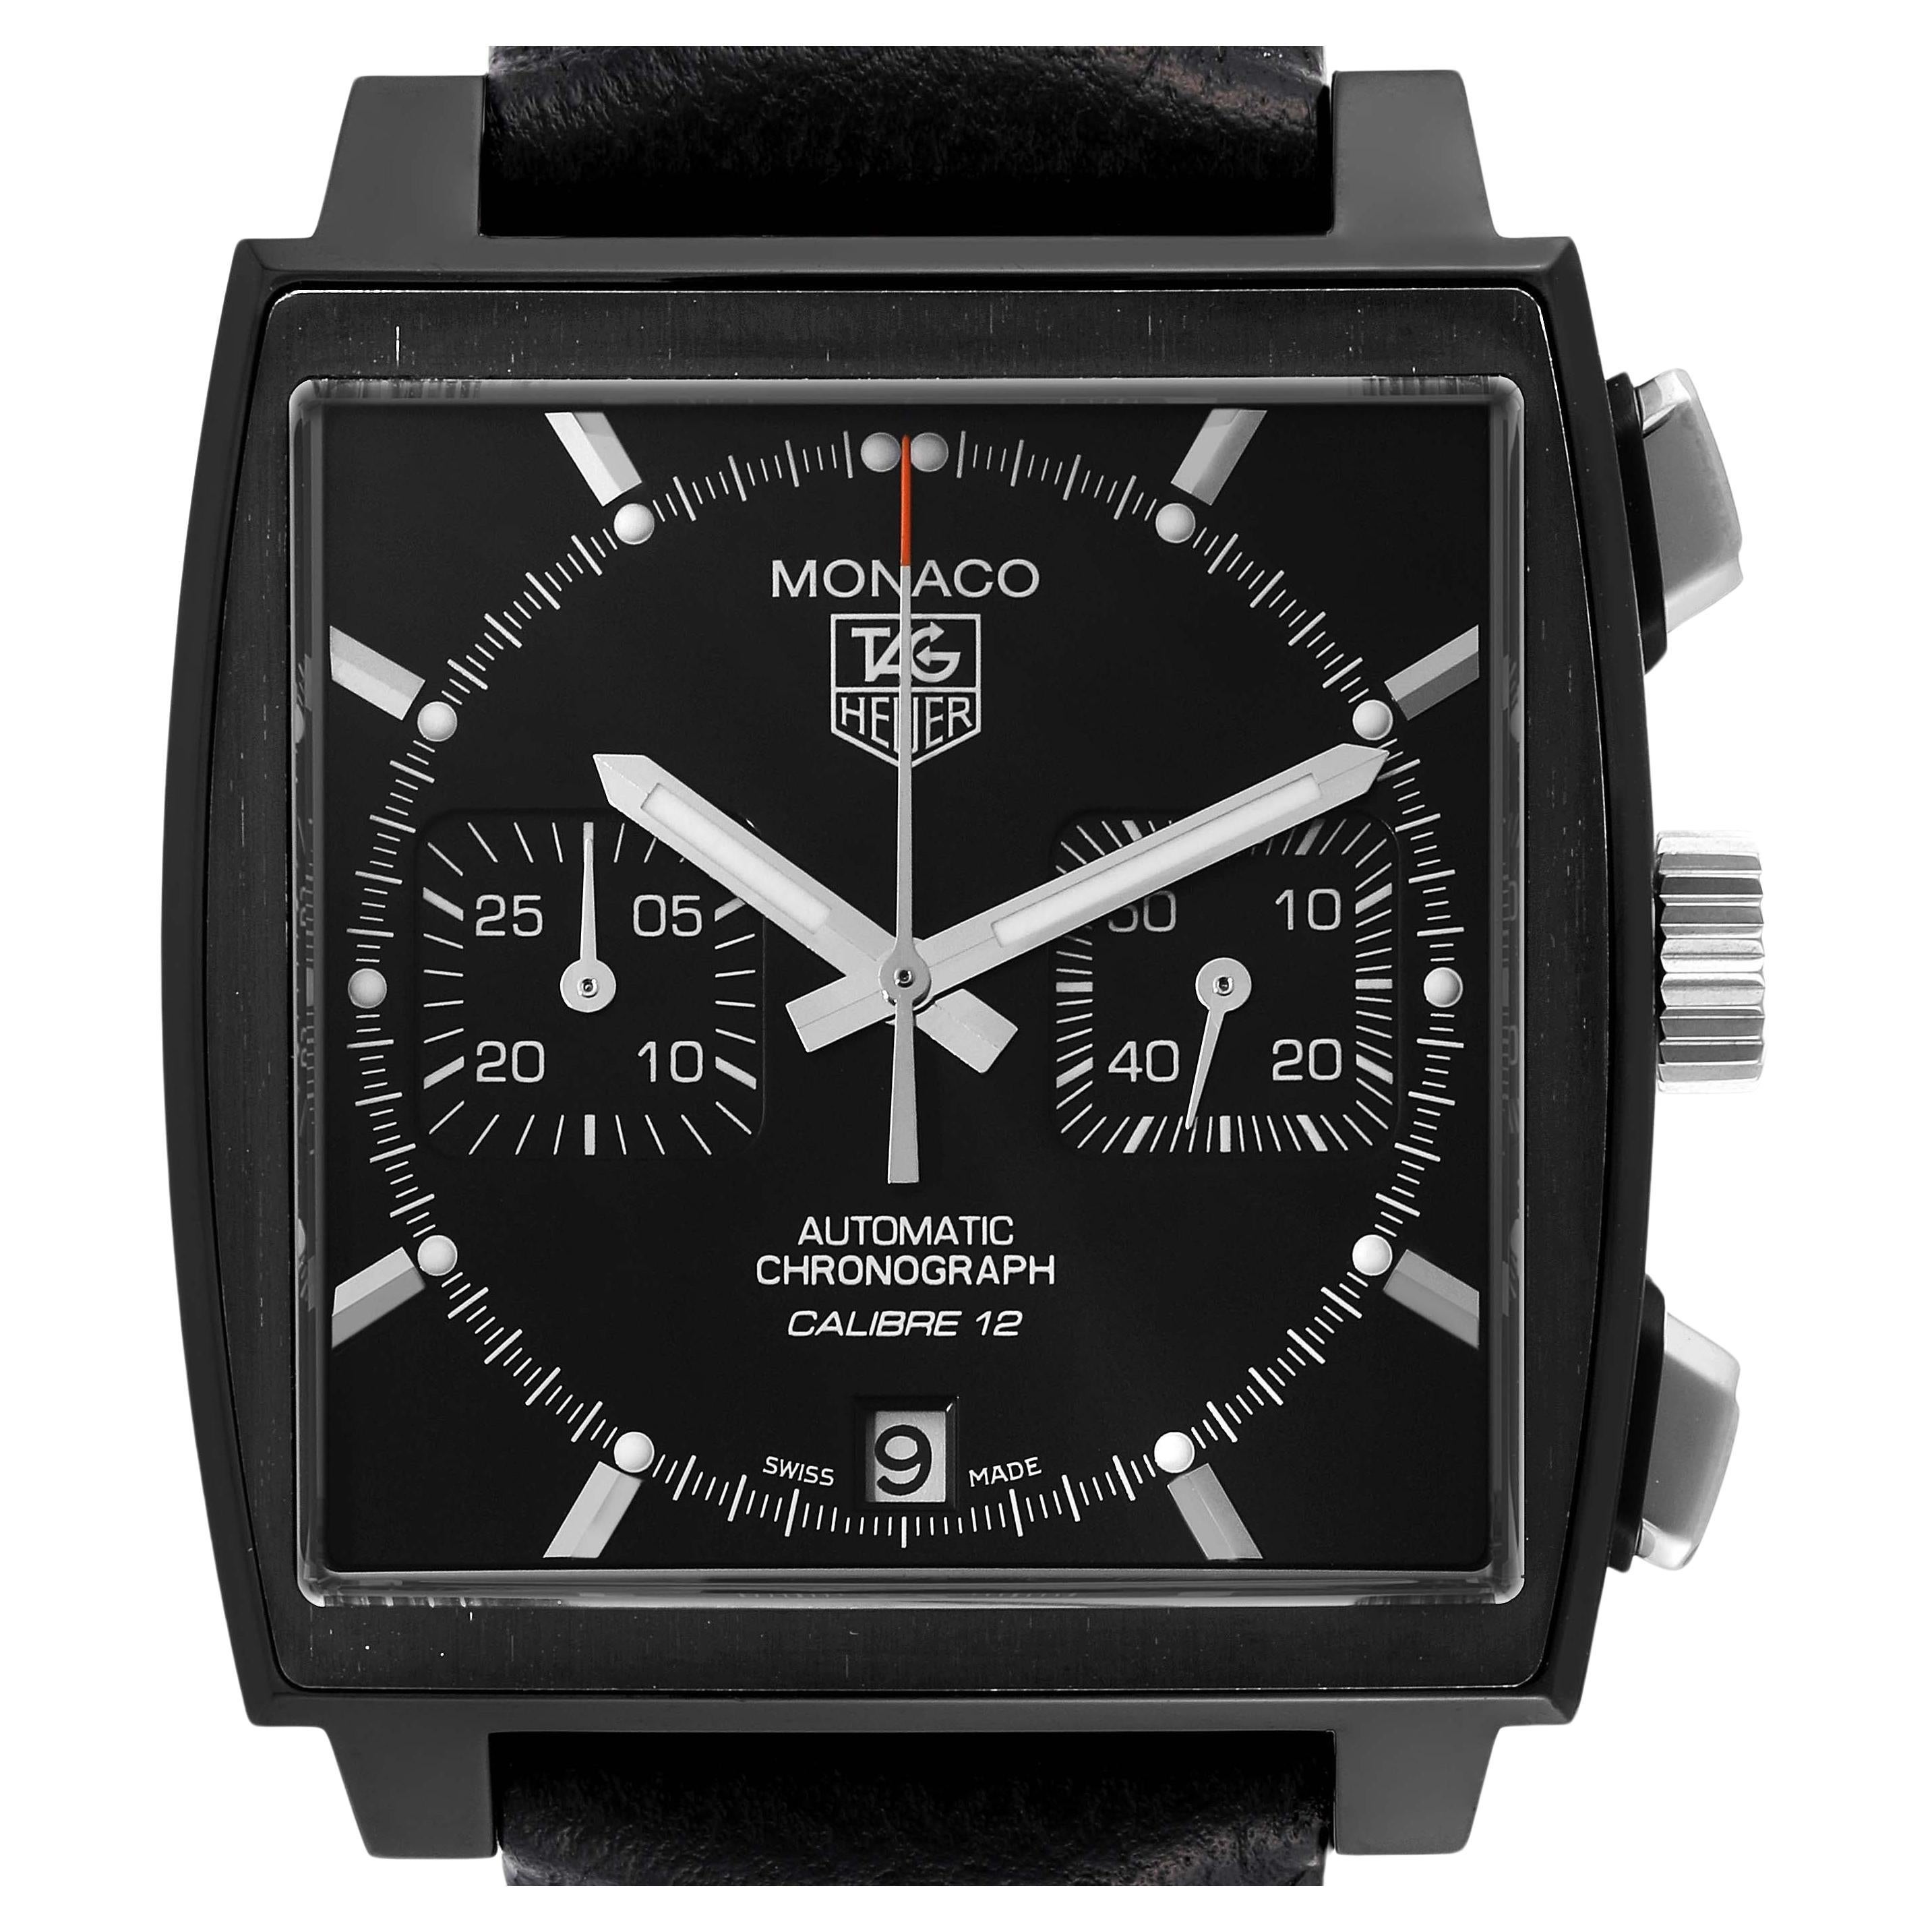 TAG Heuer Monaco Calibre 6 for $5,100 for sale from a Private